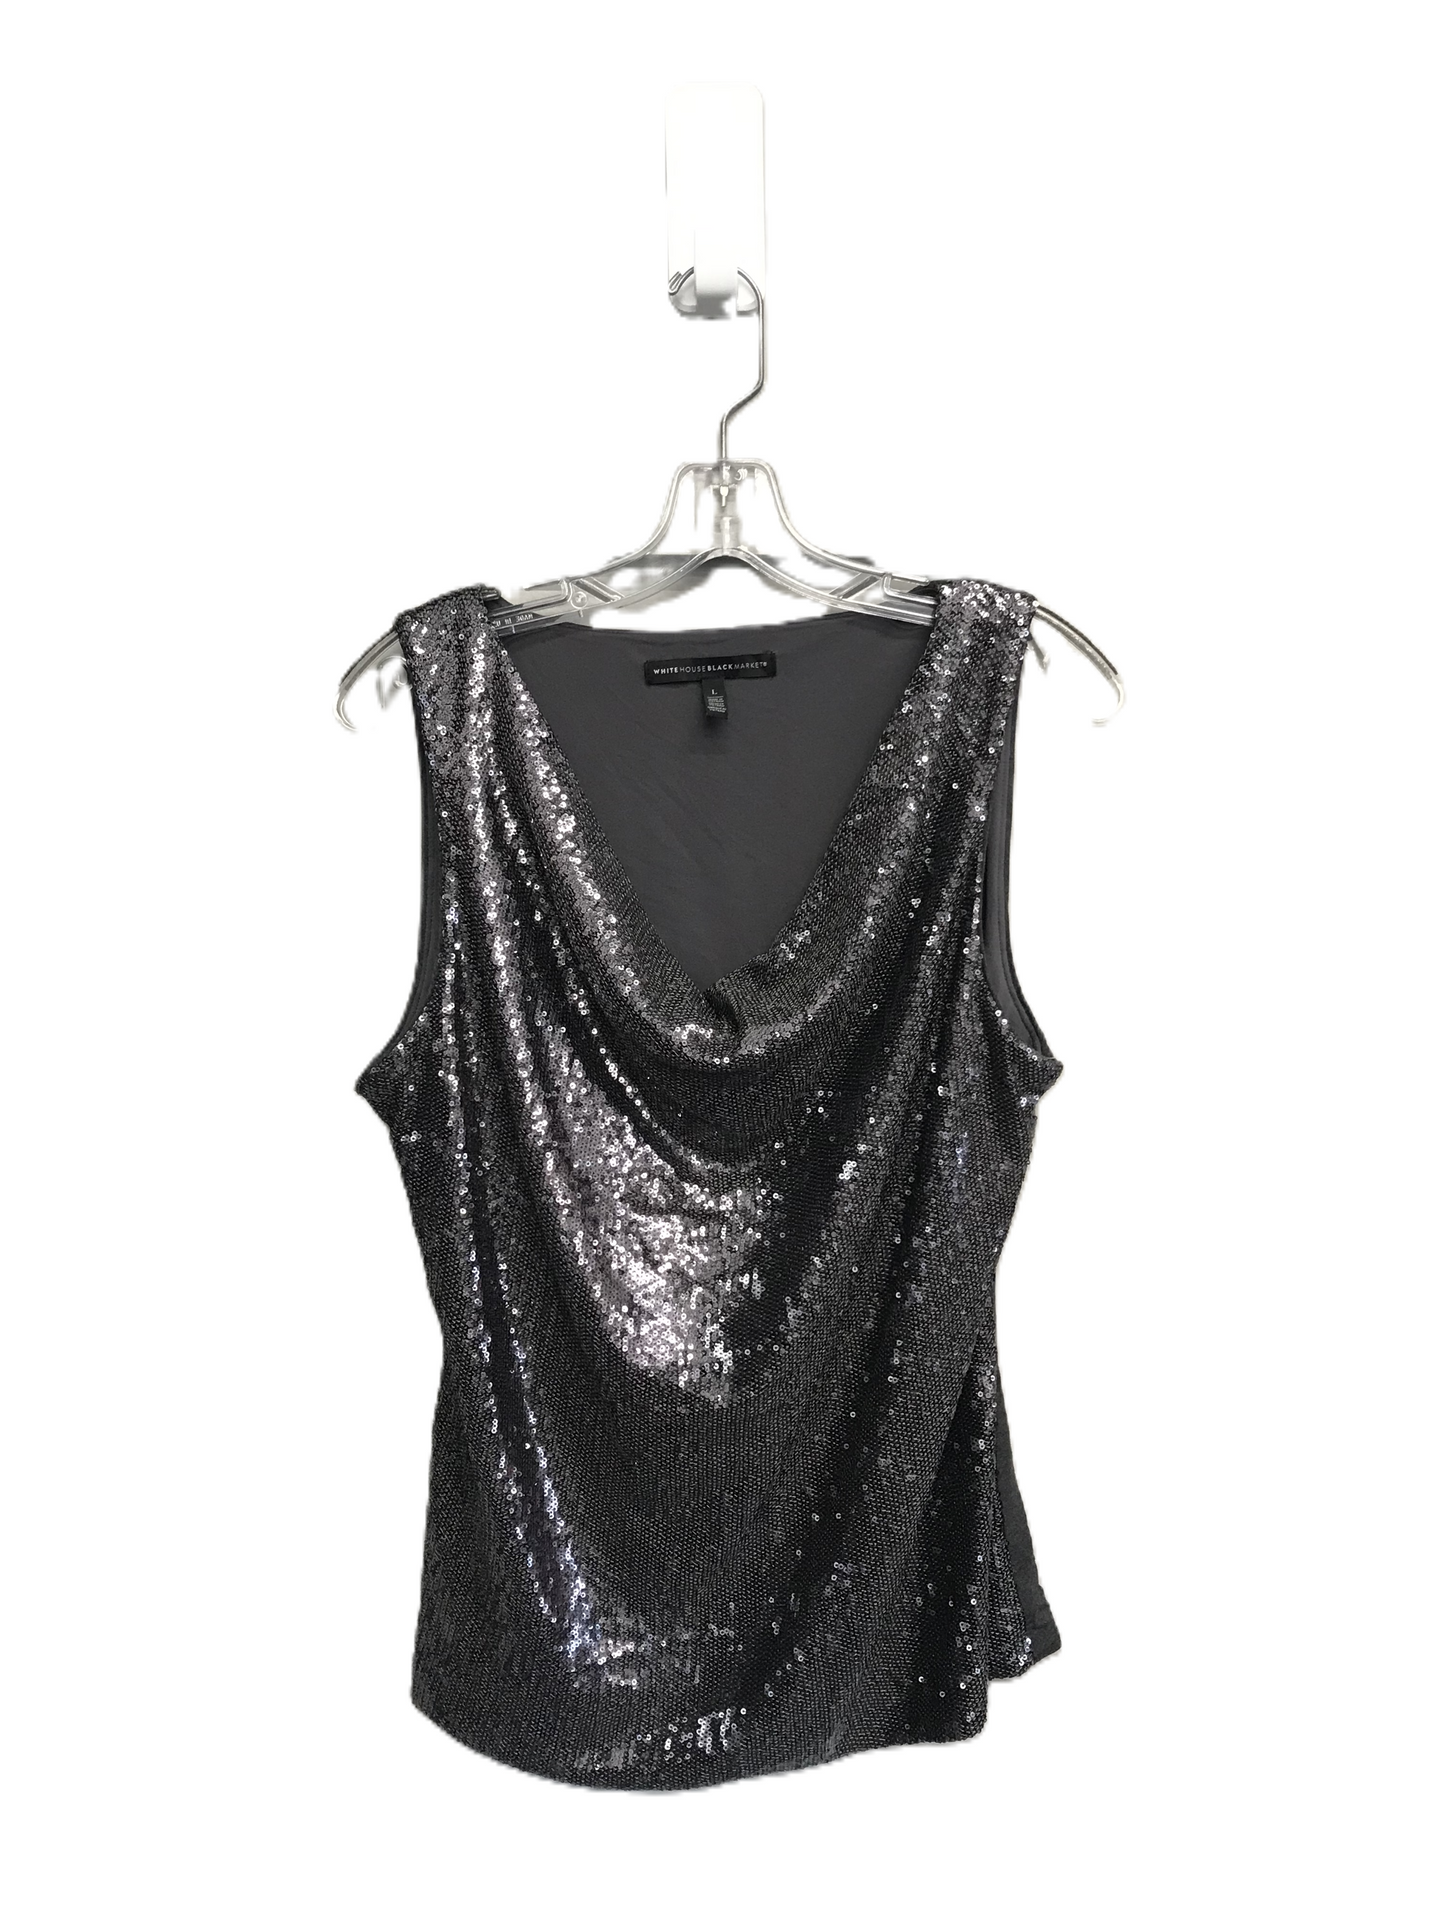 Silver Top Sleeveless By White House Black Market, Size: L